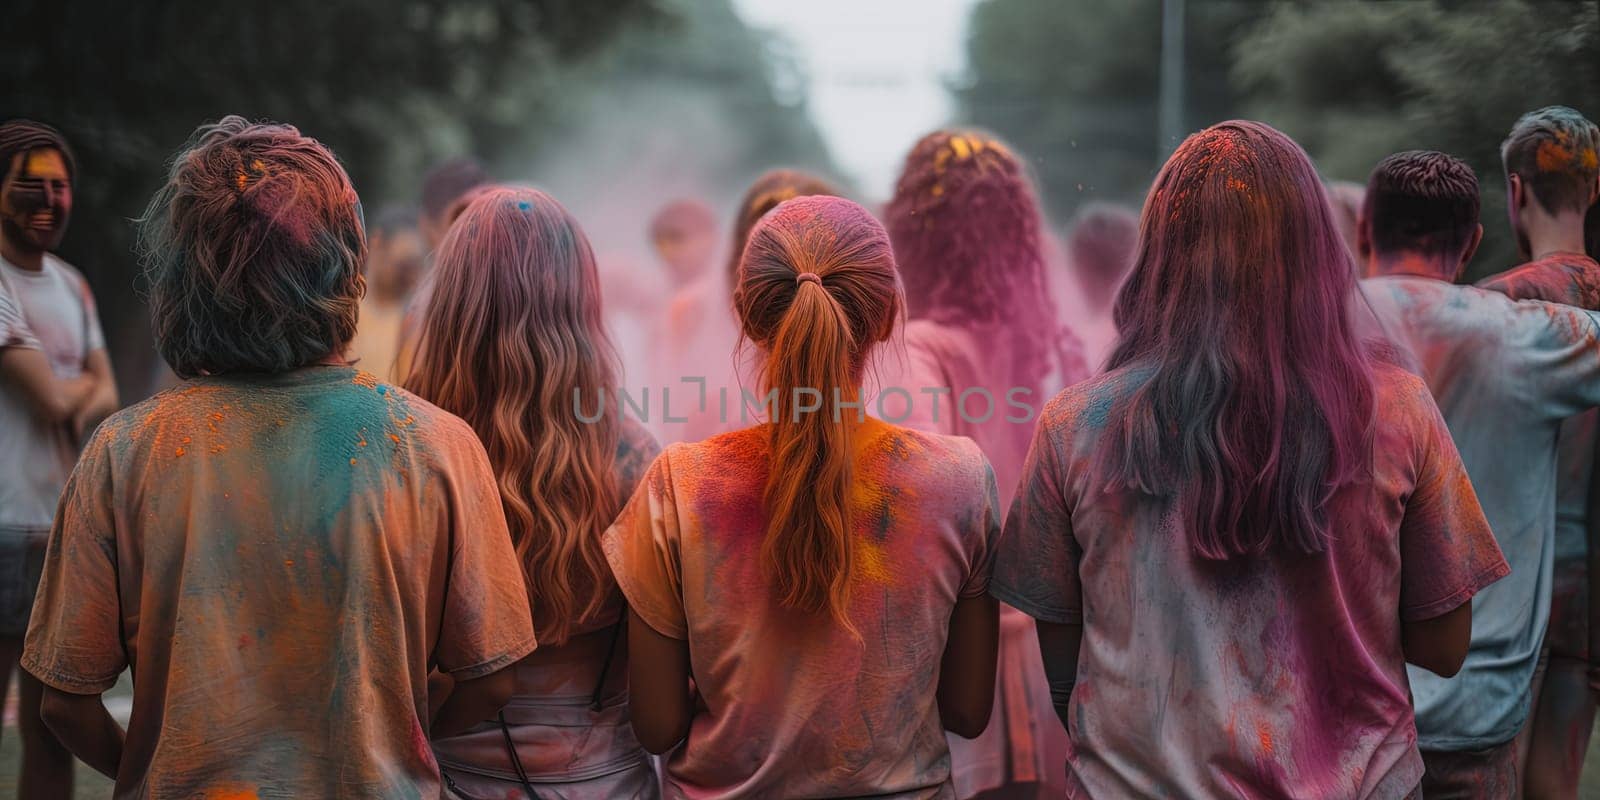 People In Holi Powder Paint Celebrating Holidays Outdoors by tan4ikk1